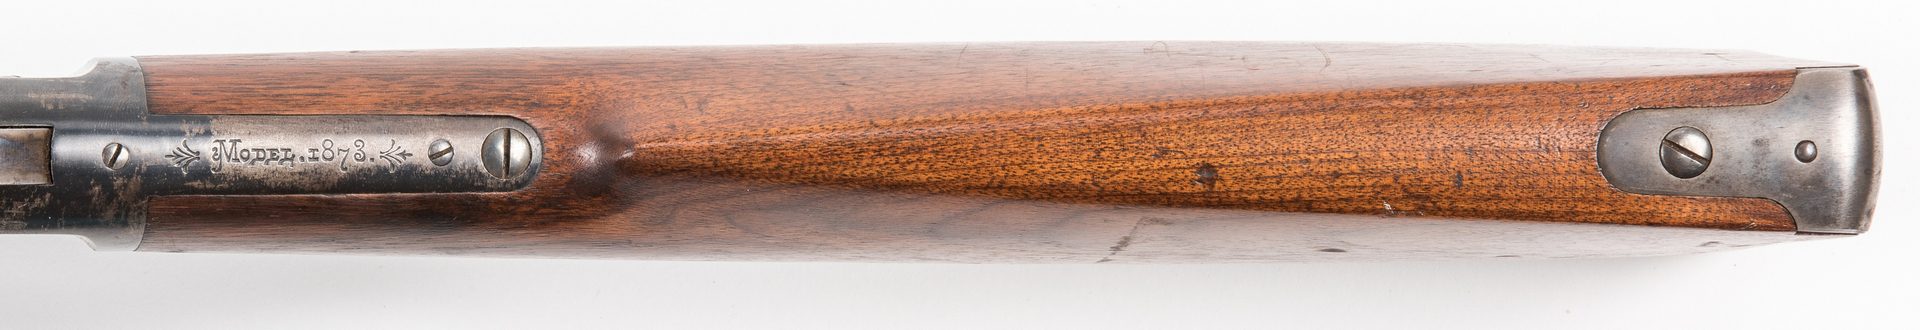 Lot 825: Winchester Model 1873, 44-40 Lever Action Rifle